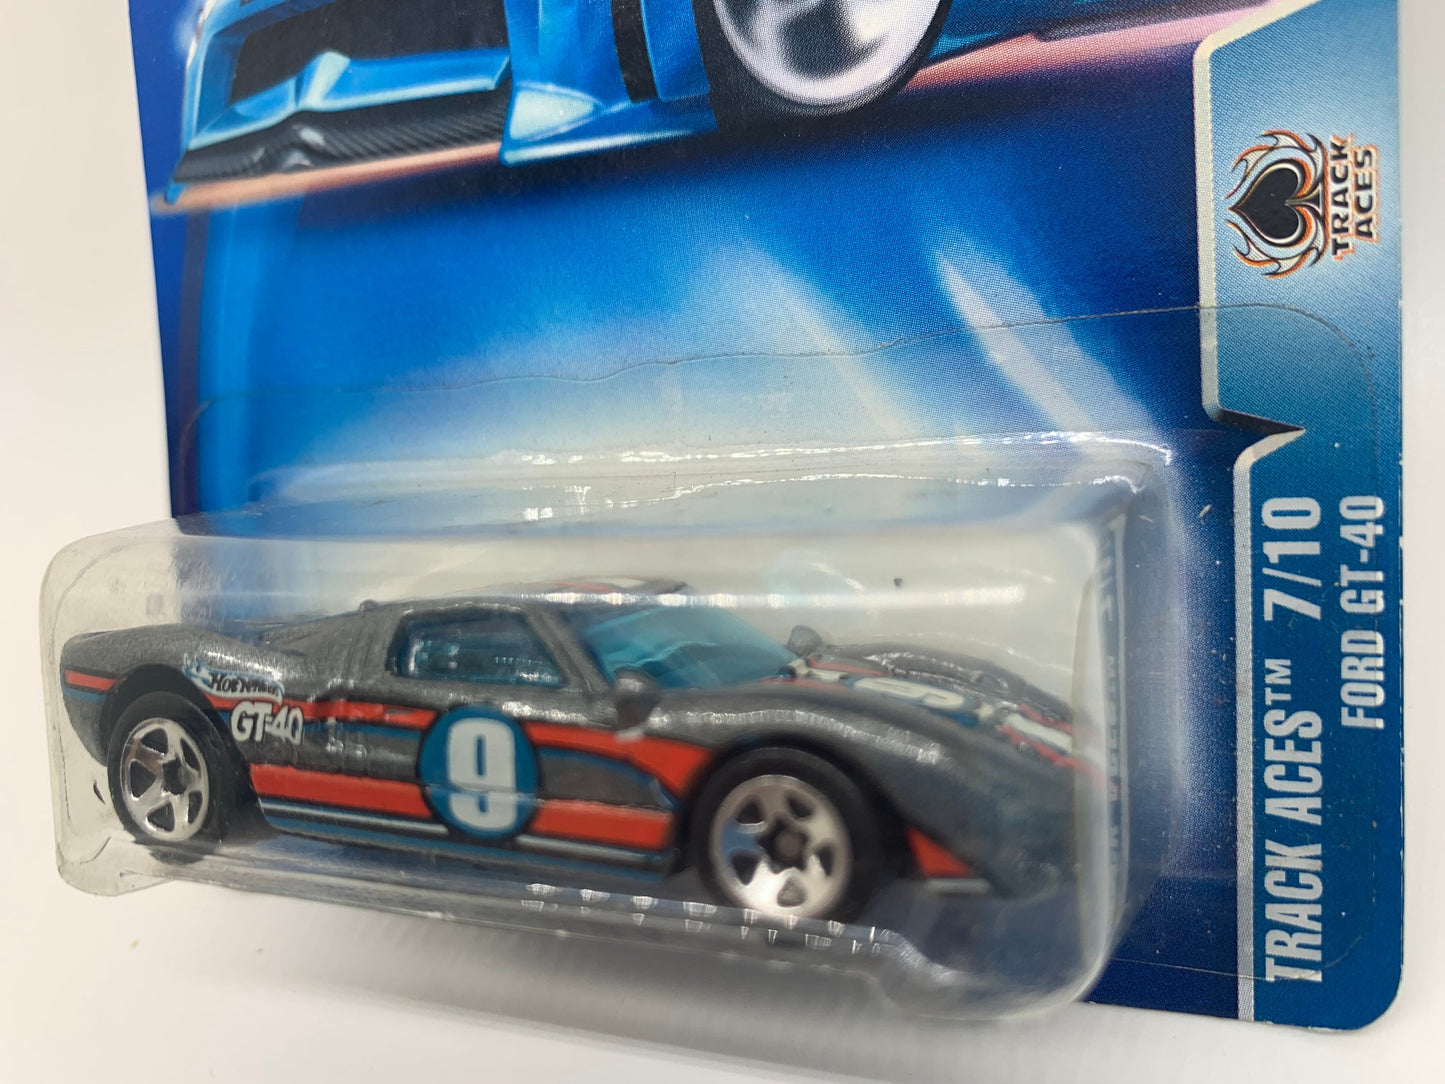 Hot Wheels Ford GT-40 Spade Gray Track Aces Perfect Birthday Gift Collectable Miniature Scale Model Toy Car